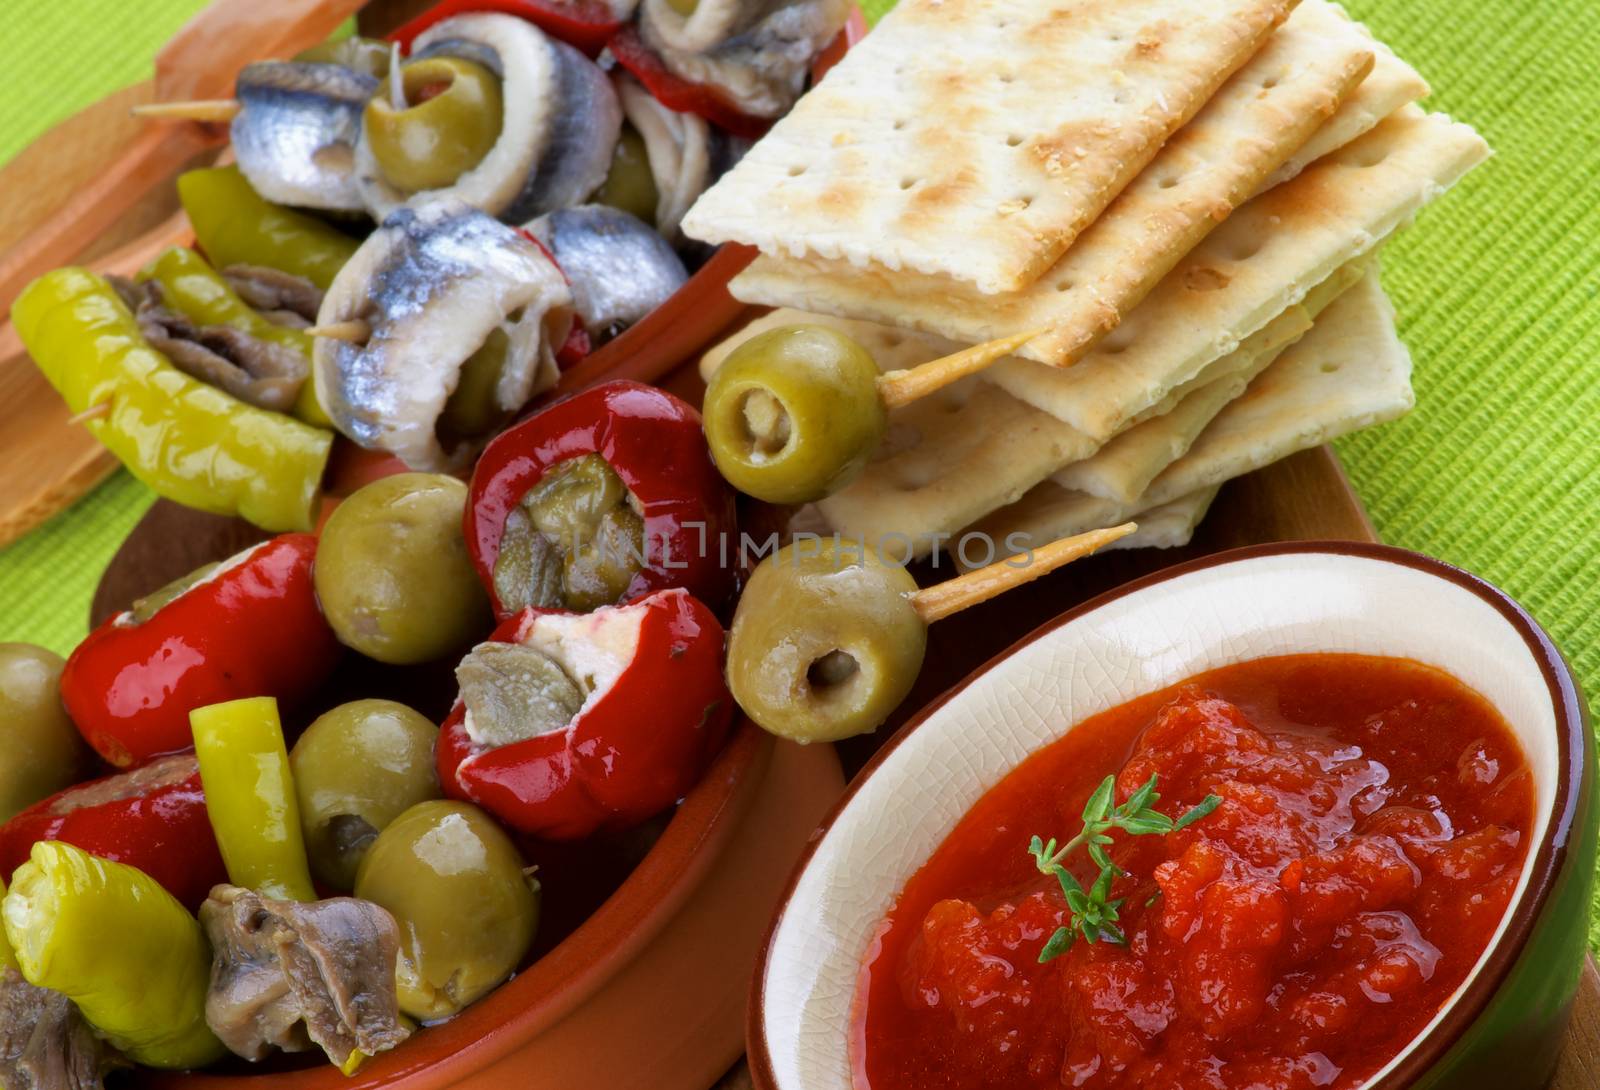 Delicious Spanish Snacks with Tomatoes Sauce, Anchovies, Green Olives, Stuffed Small Peppers and Bread Sticks in Various Bowls closeup on Green Napkin. Focus on Foreground